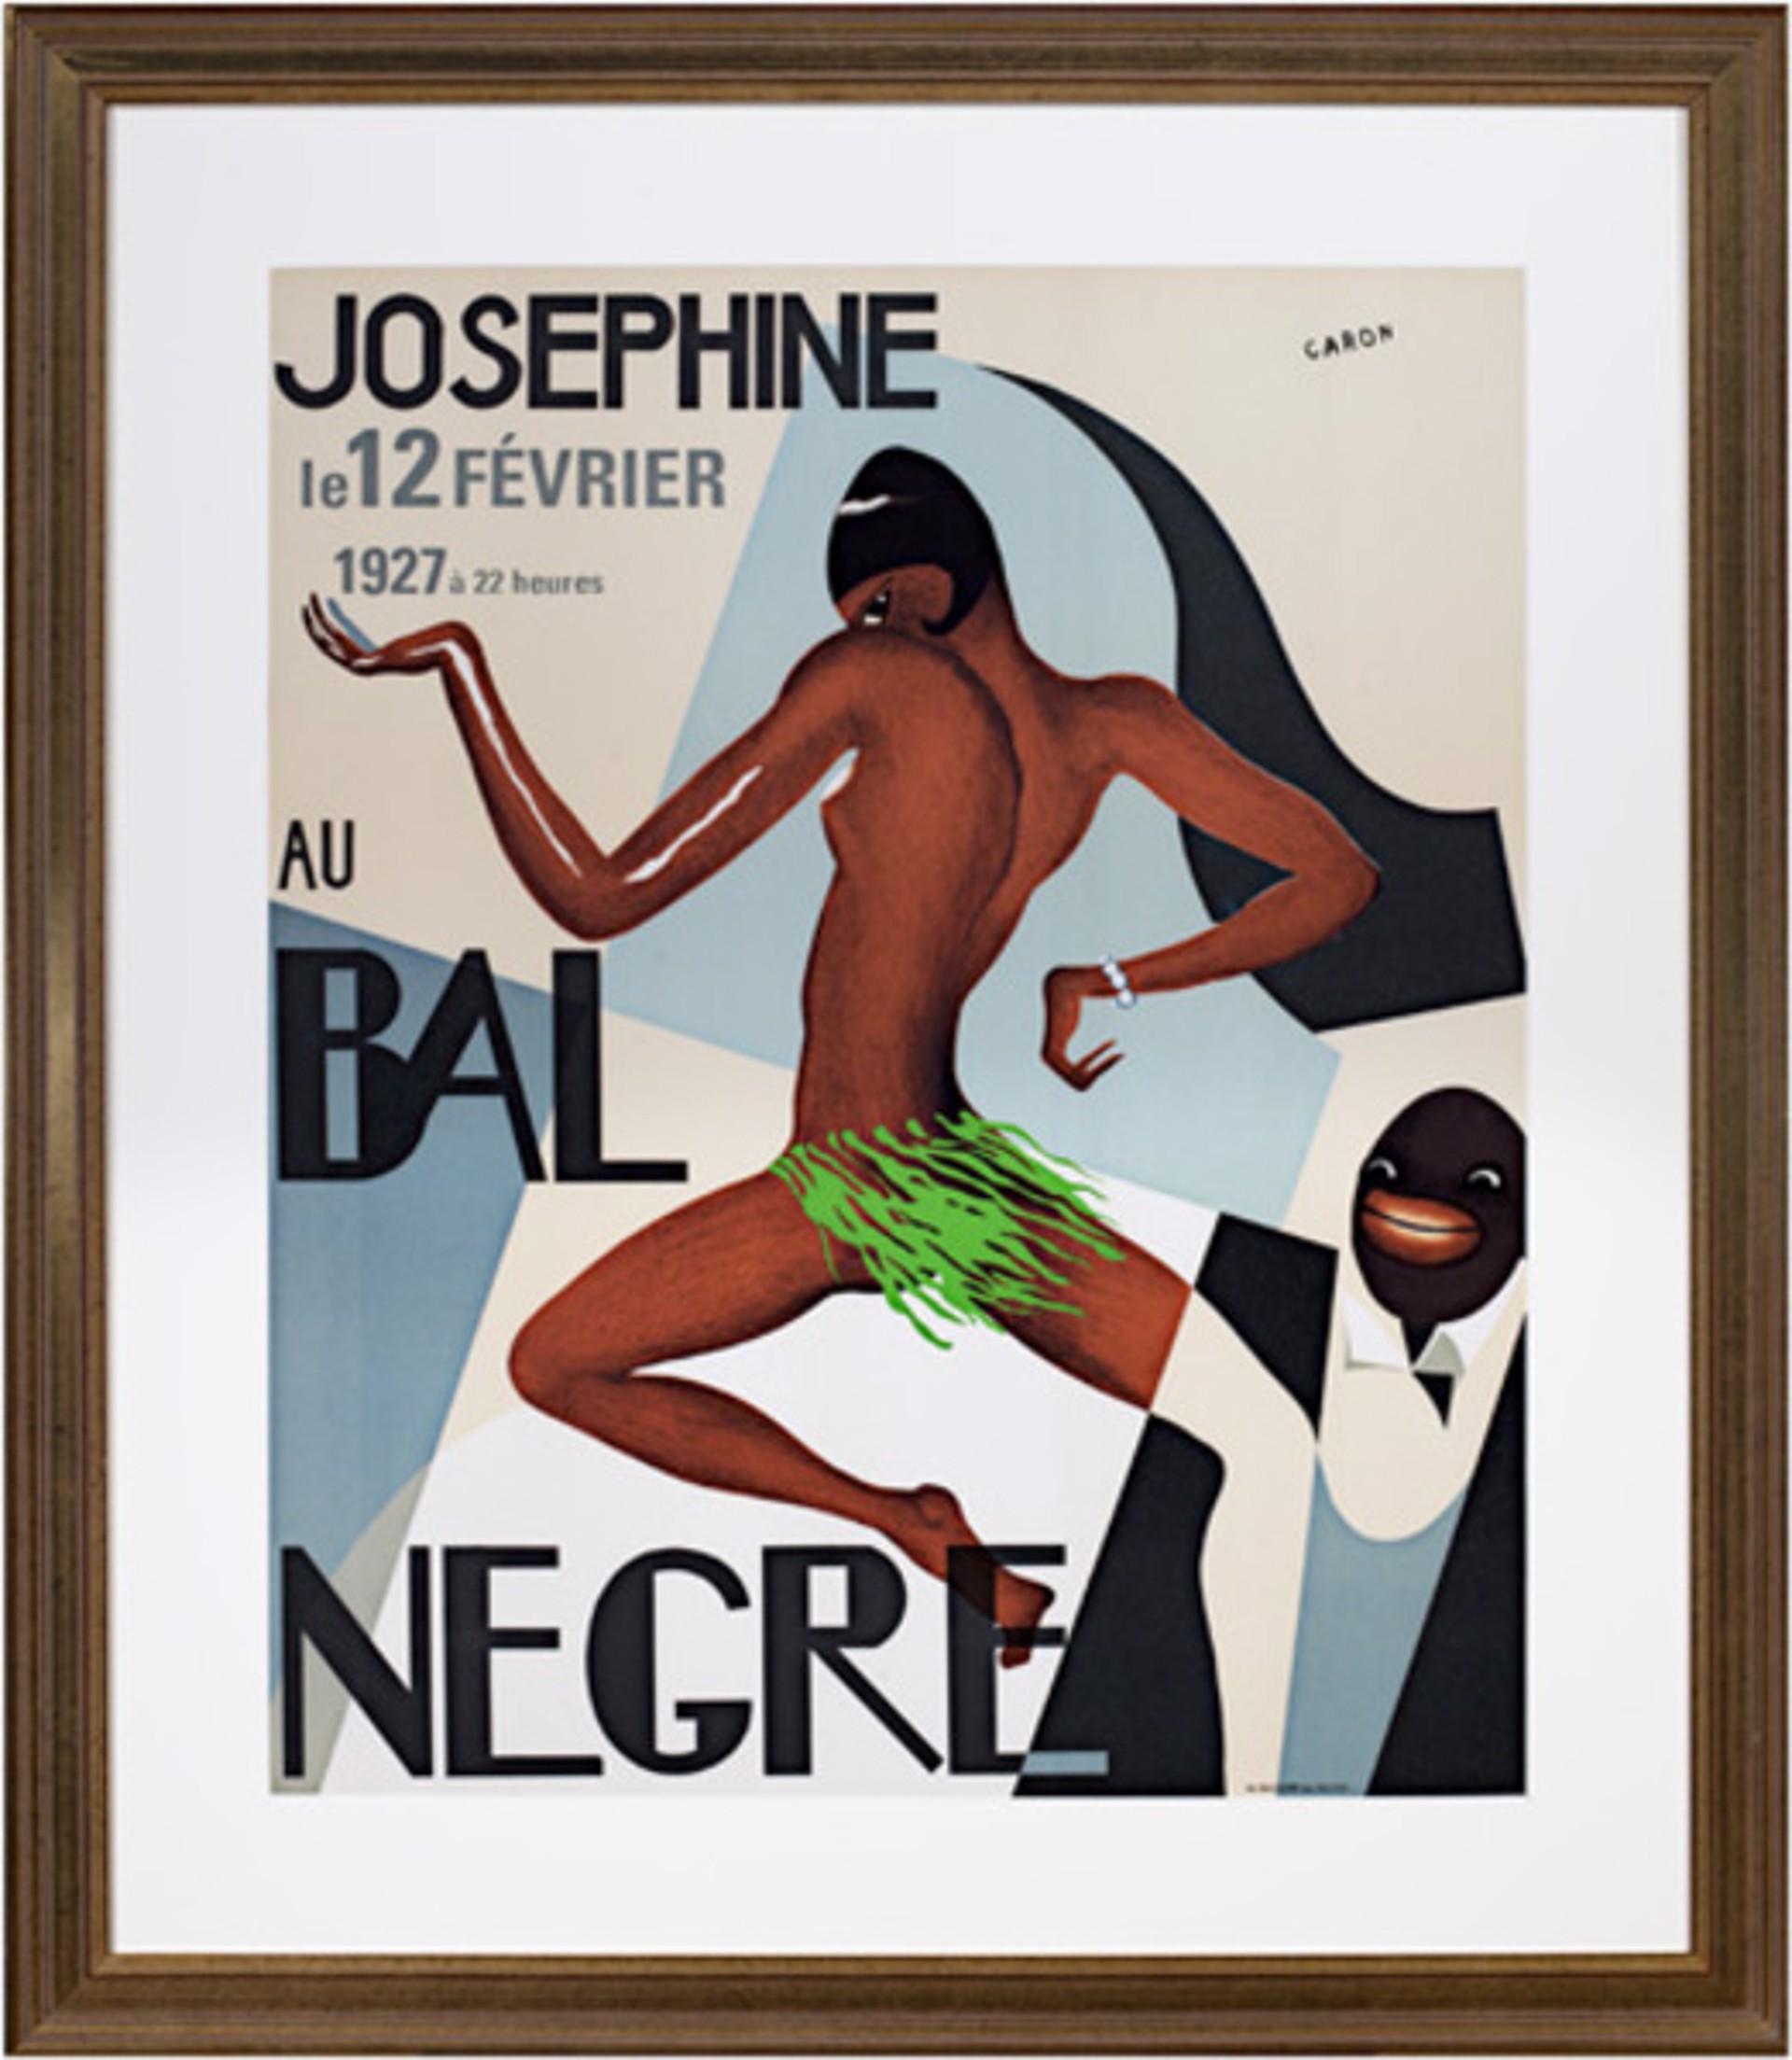 Josephine Au Bal Negre by André-Charles Caron